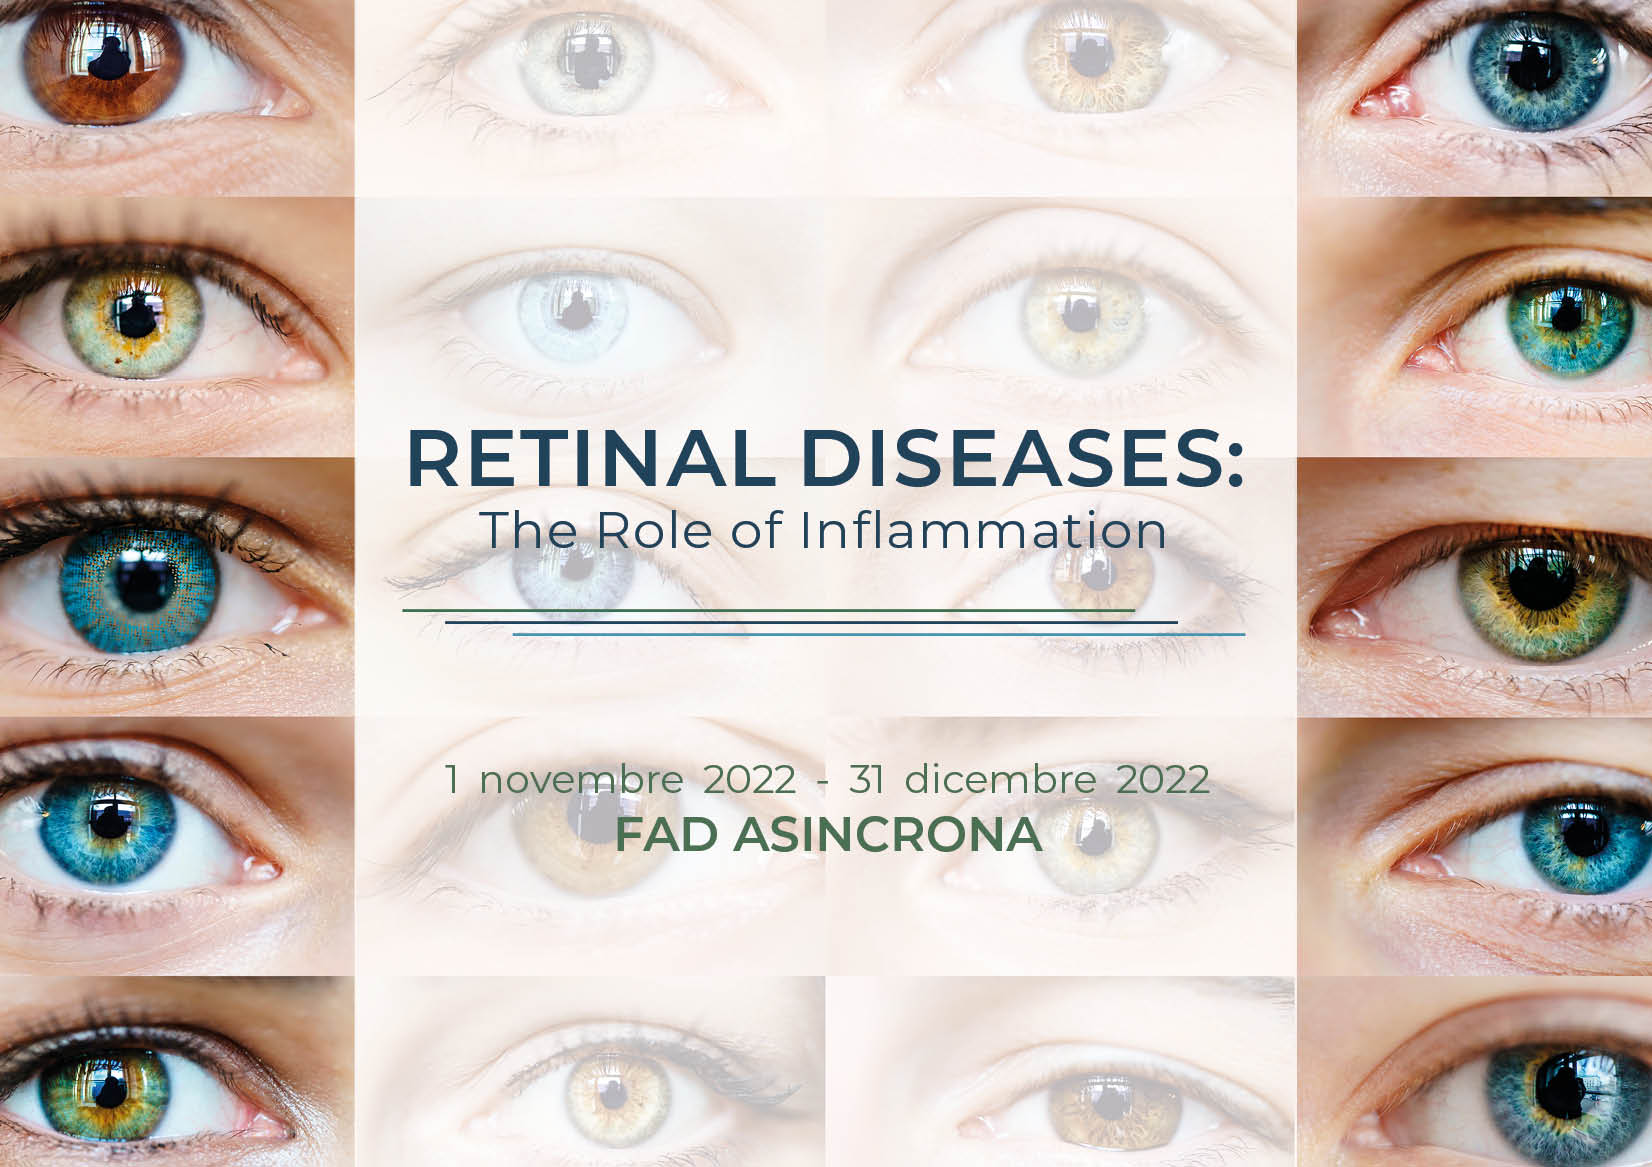 RETINAL DISEASES – The Role of Inflammation